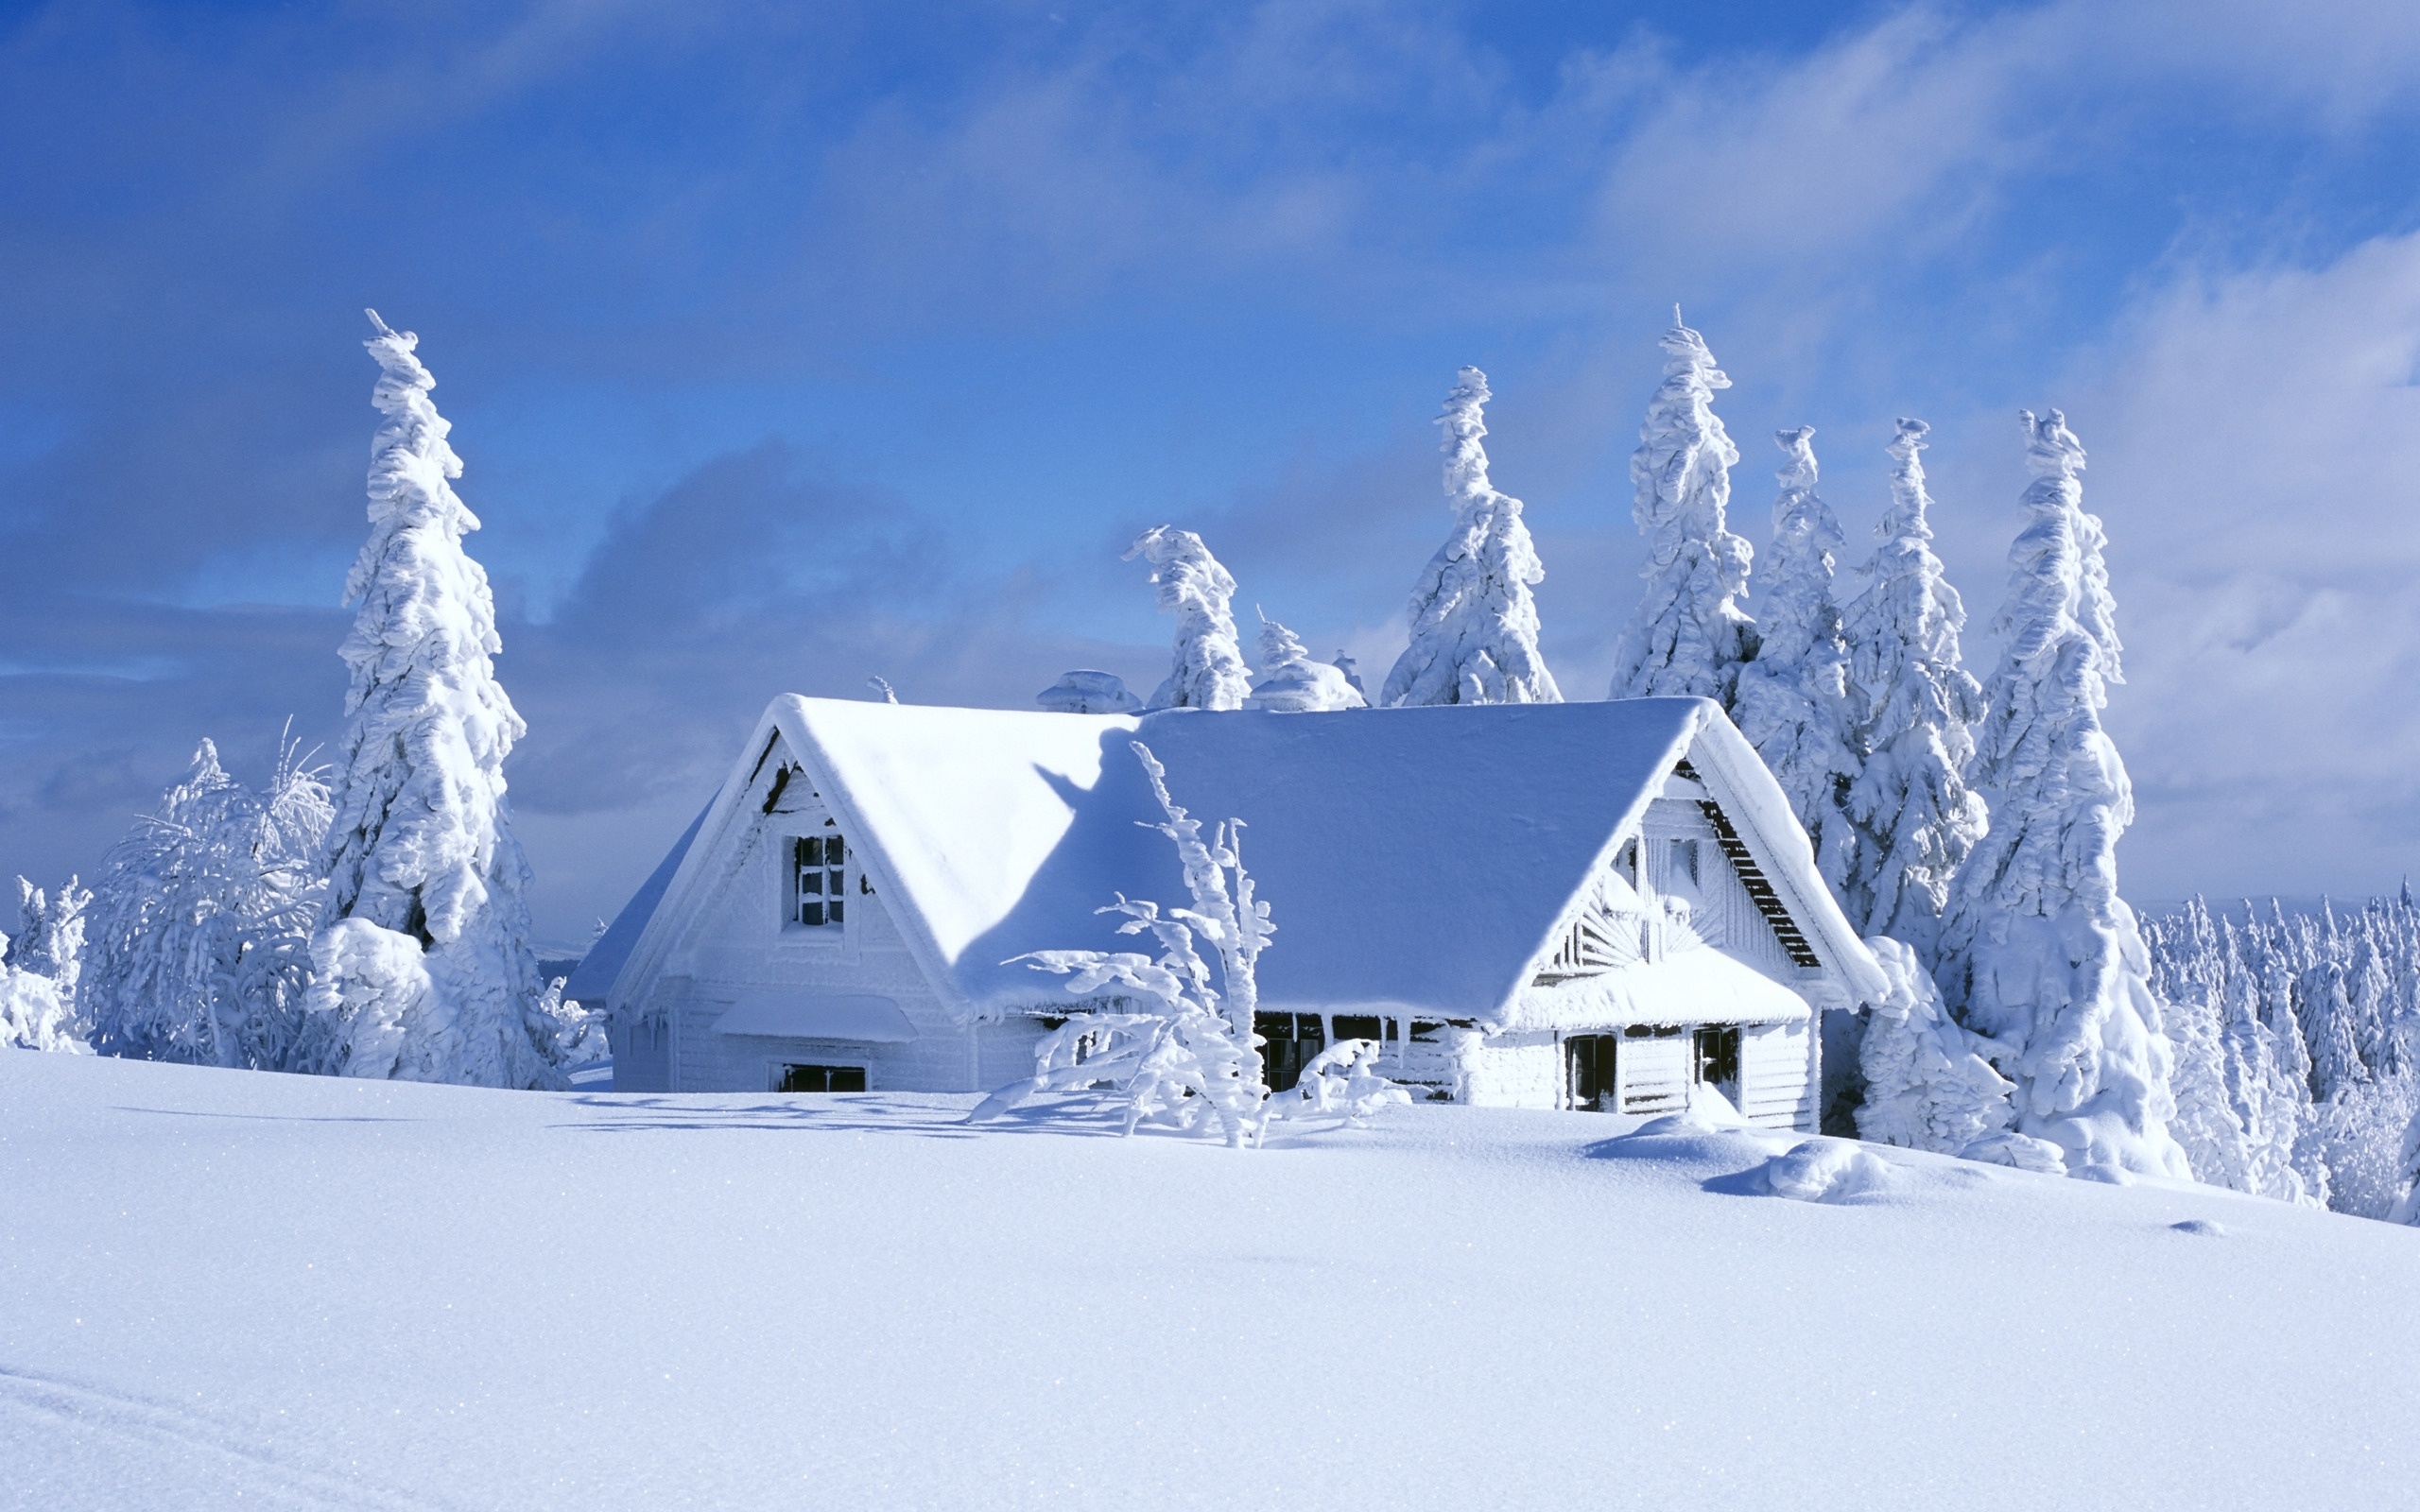 Snow Wallpaper In High Resolution For Get House Covered